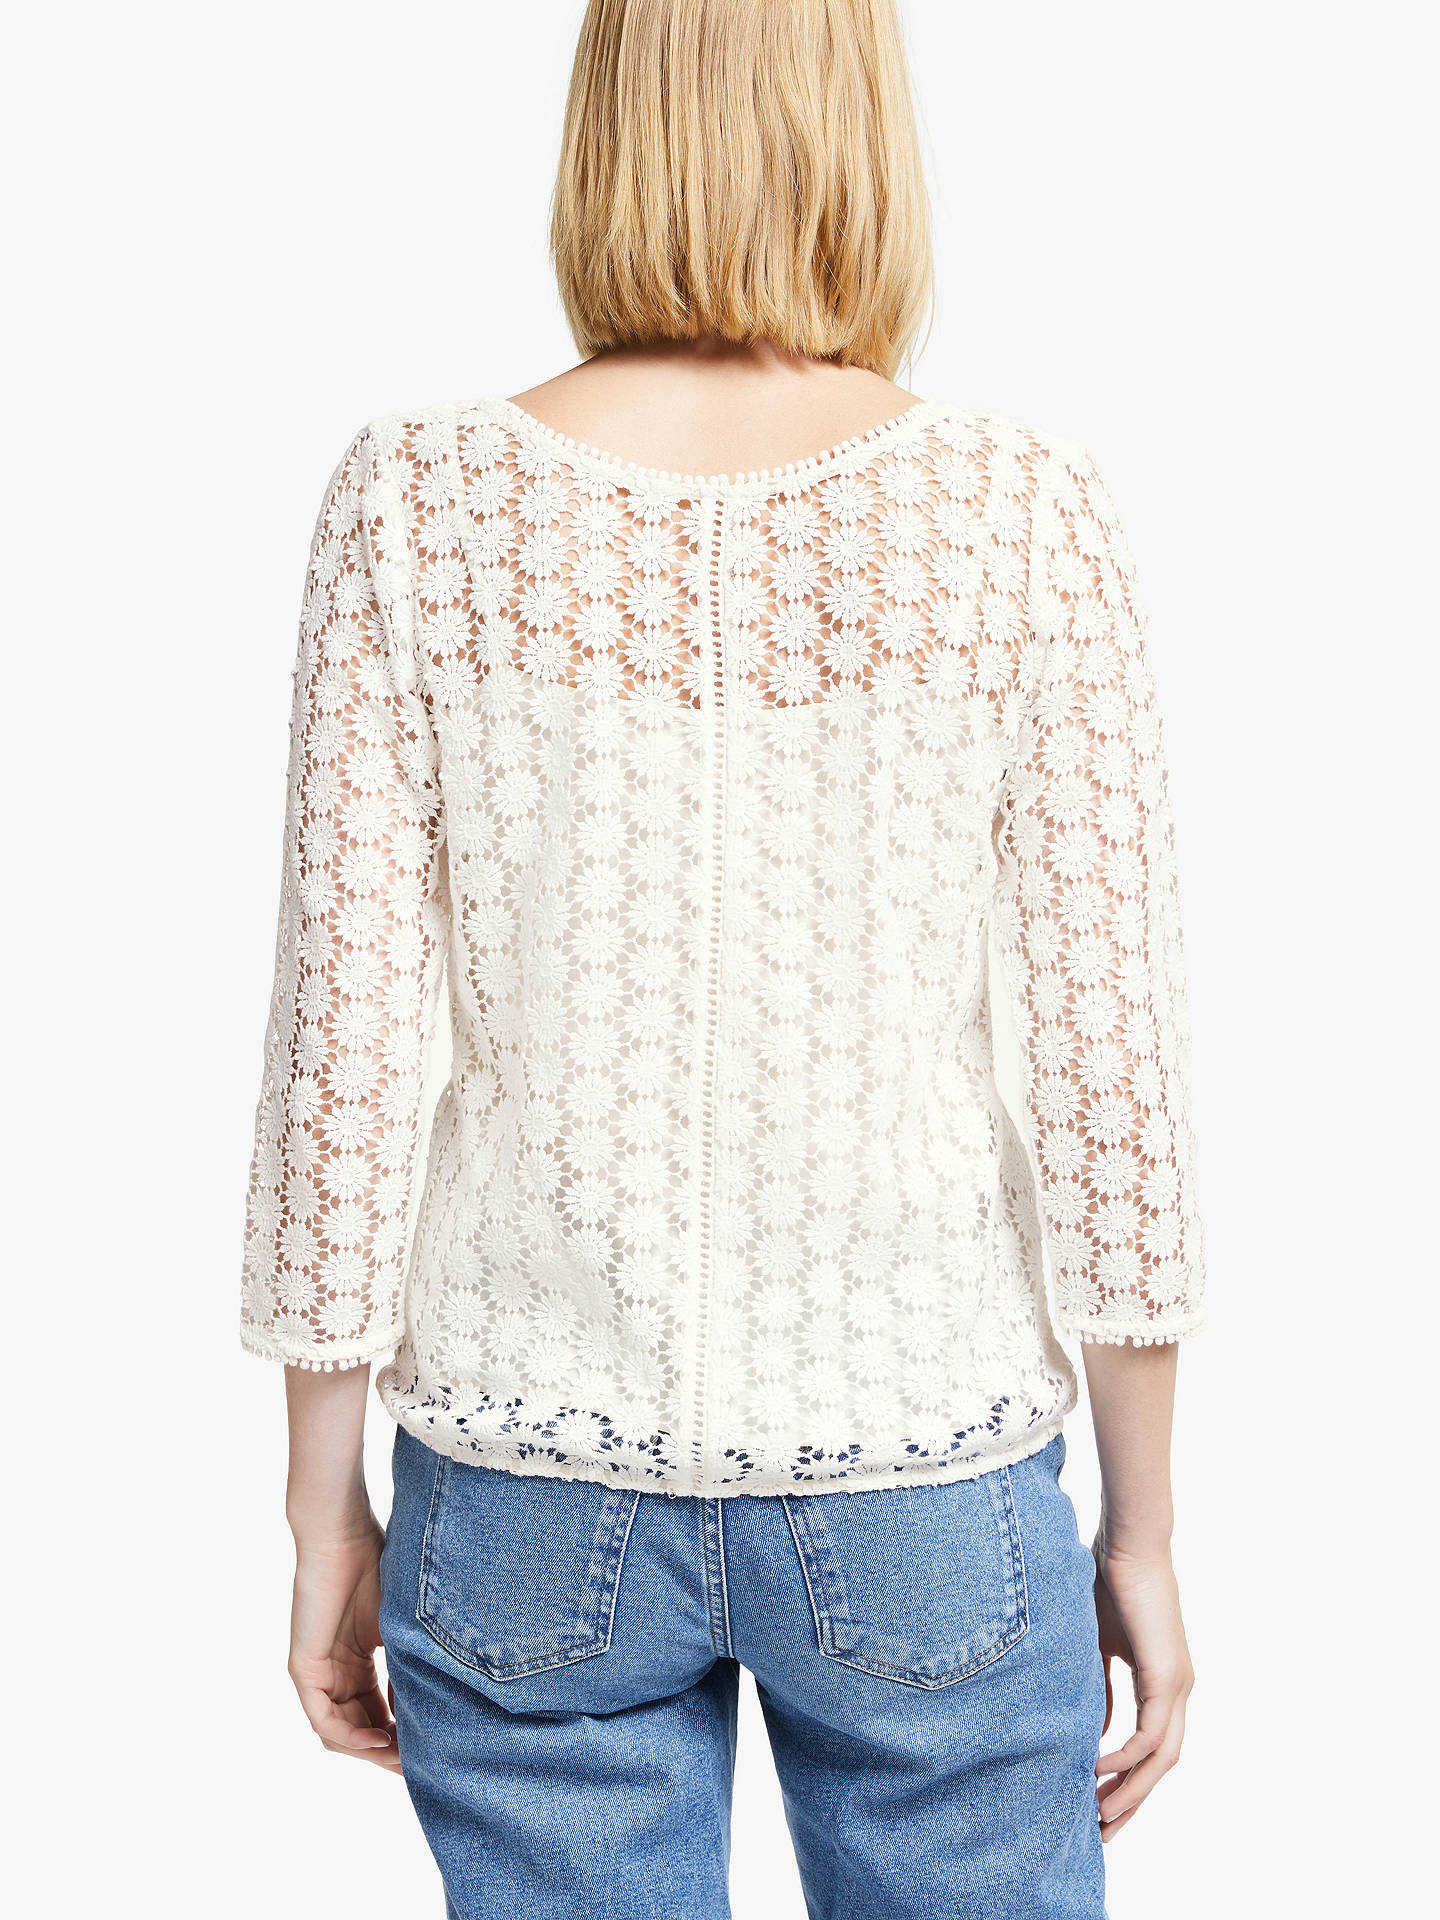 Boden Arabella Lace Top, Ivory at John Lewis & Partners